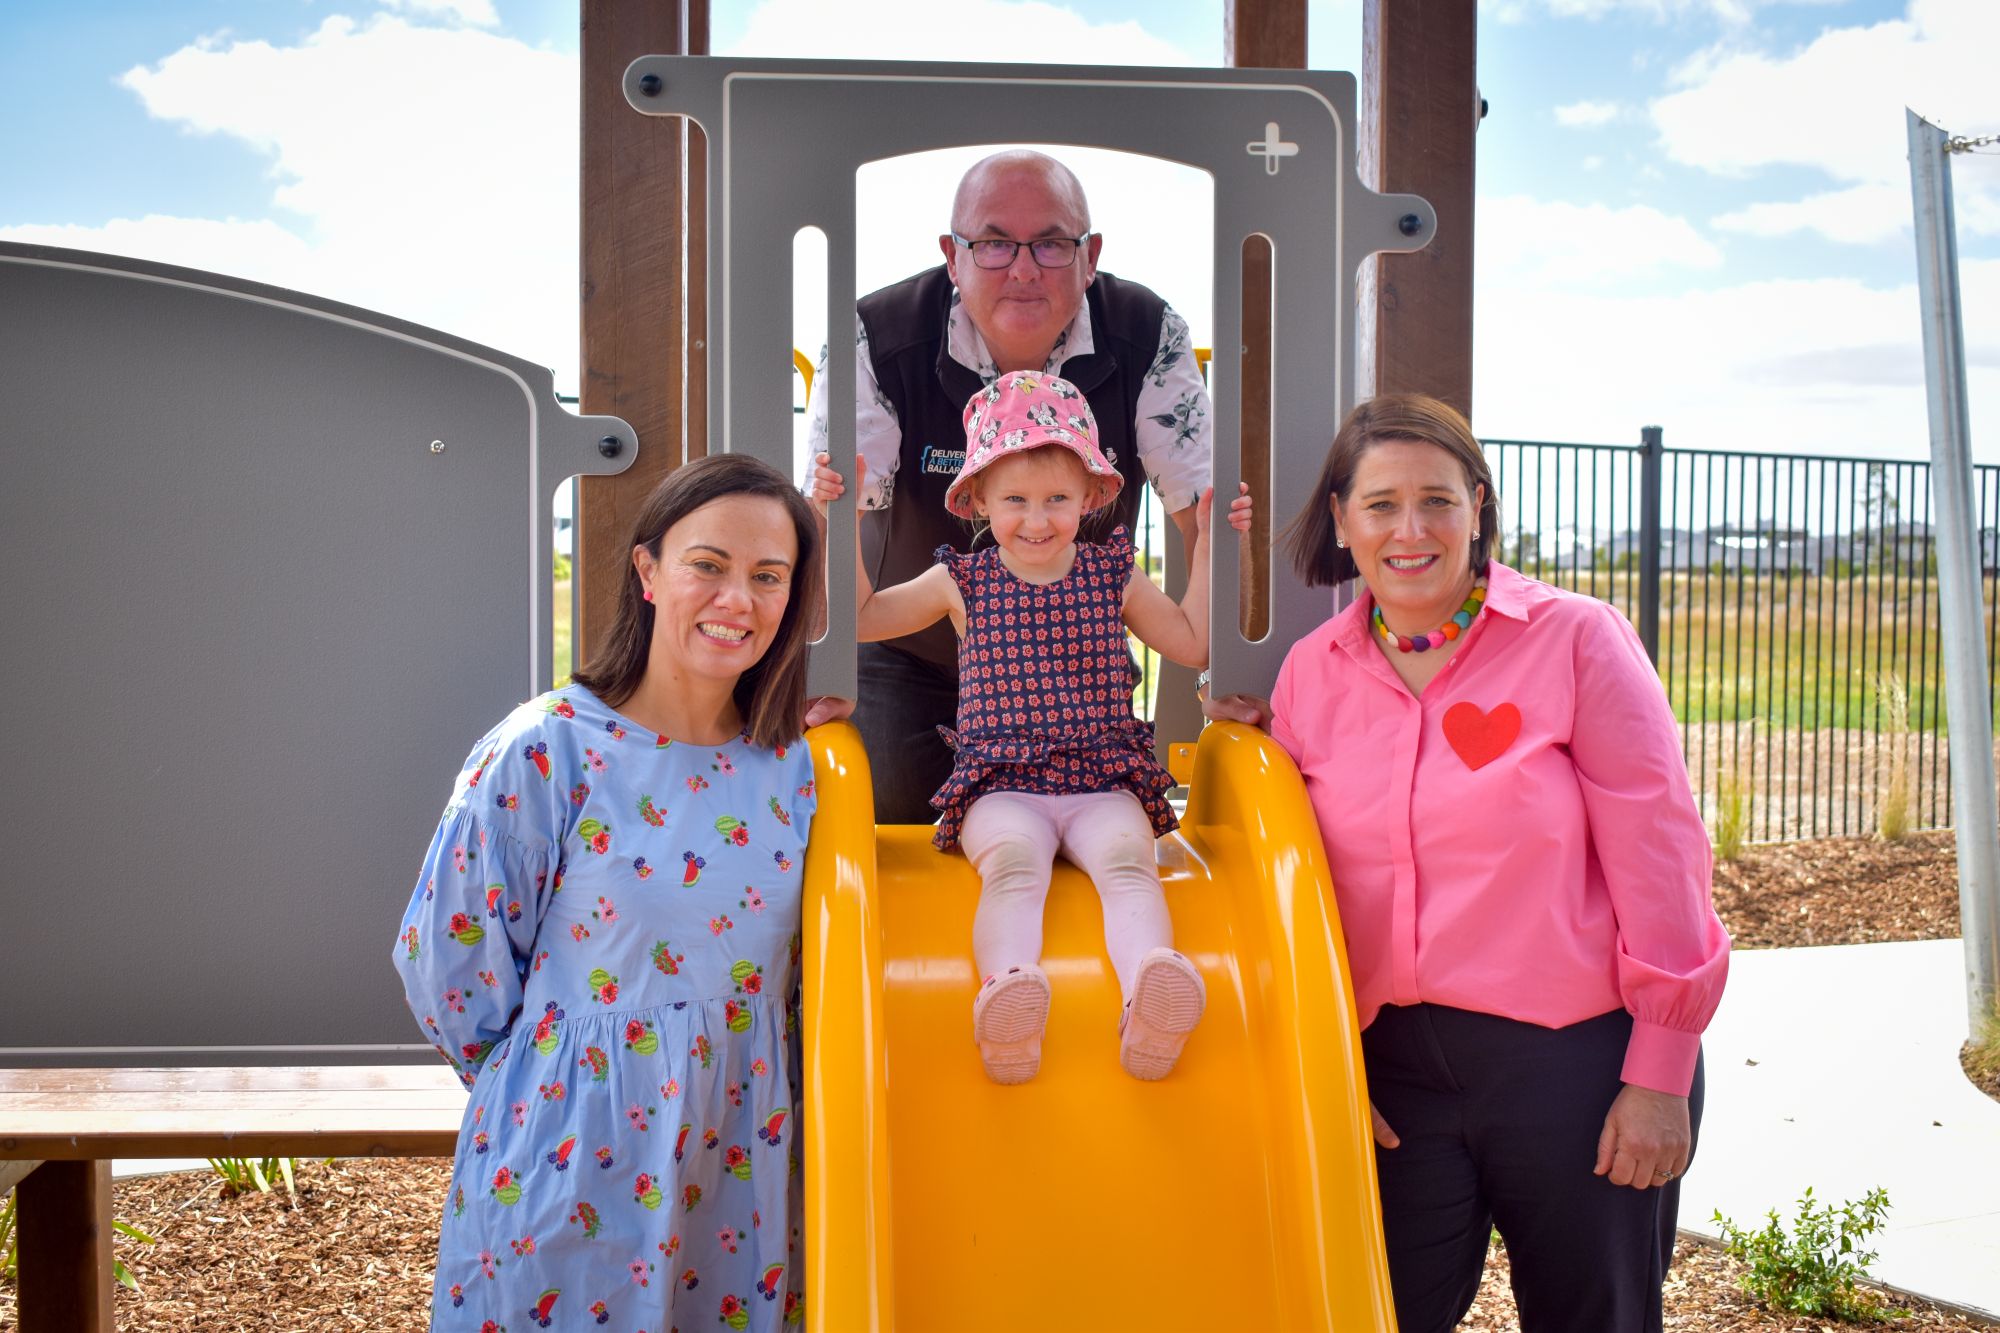 Minister for Children Lizzie Blandthorn, City of Ballarat Mayor Cr Des Hudson and Member for Wendouree Juliana Addison with Harlow at the opening of the new community hub and kindergarten in Alfredton.